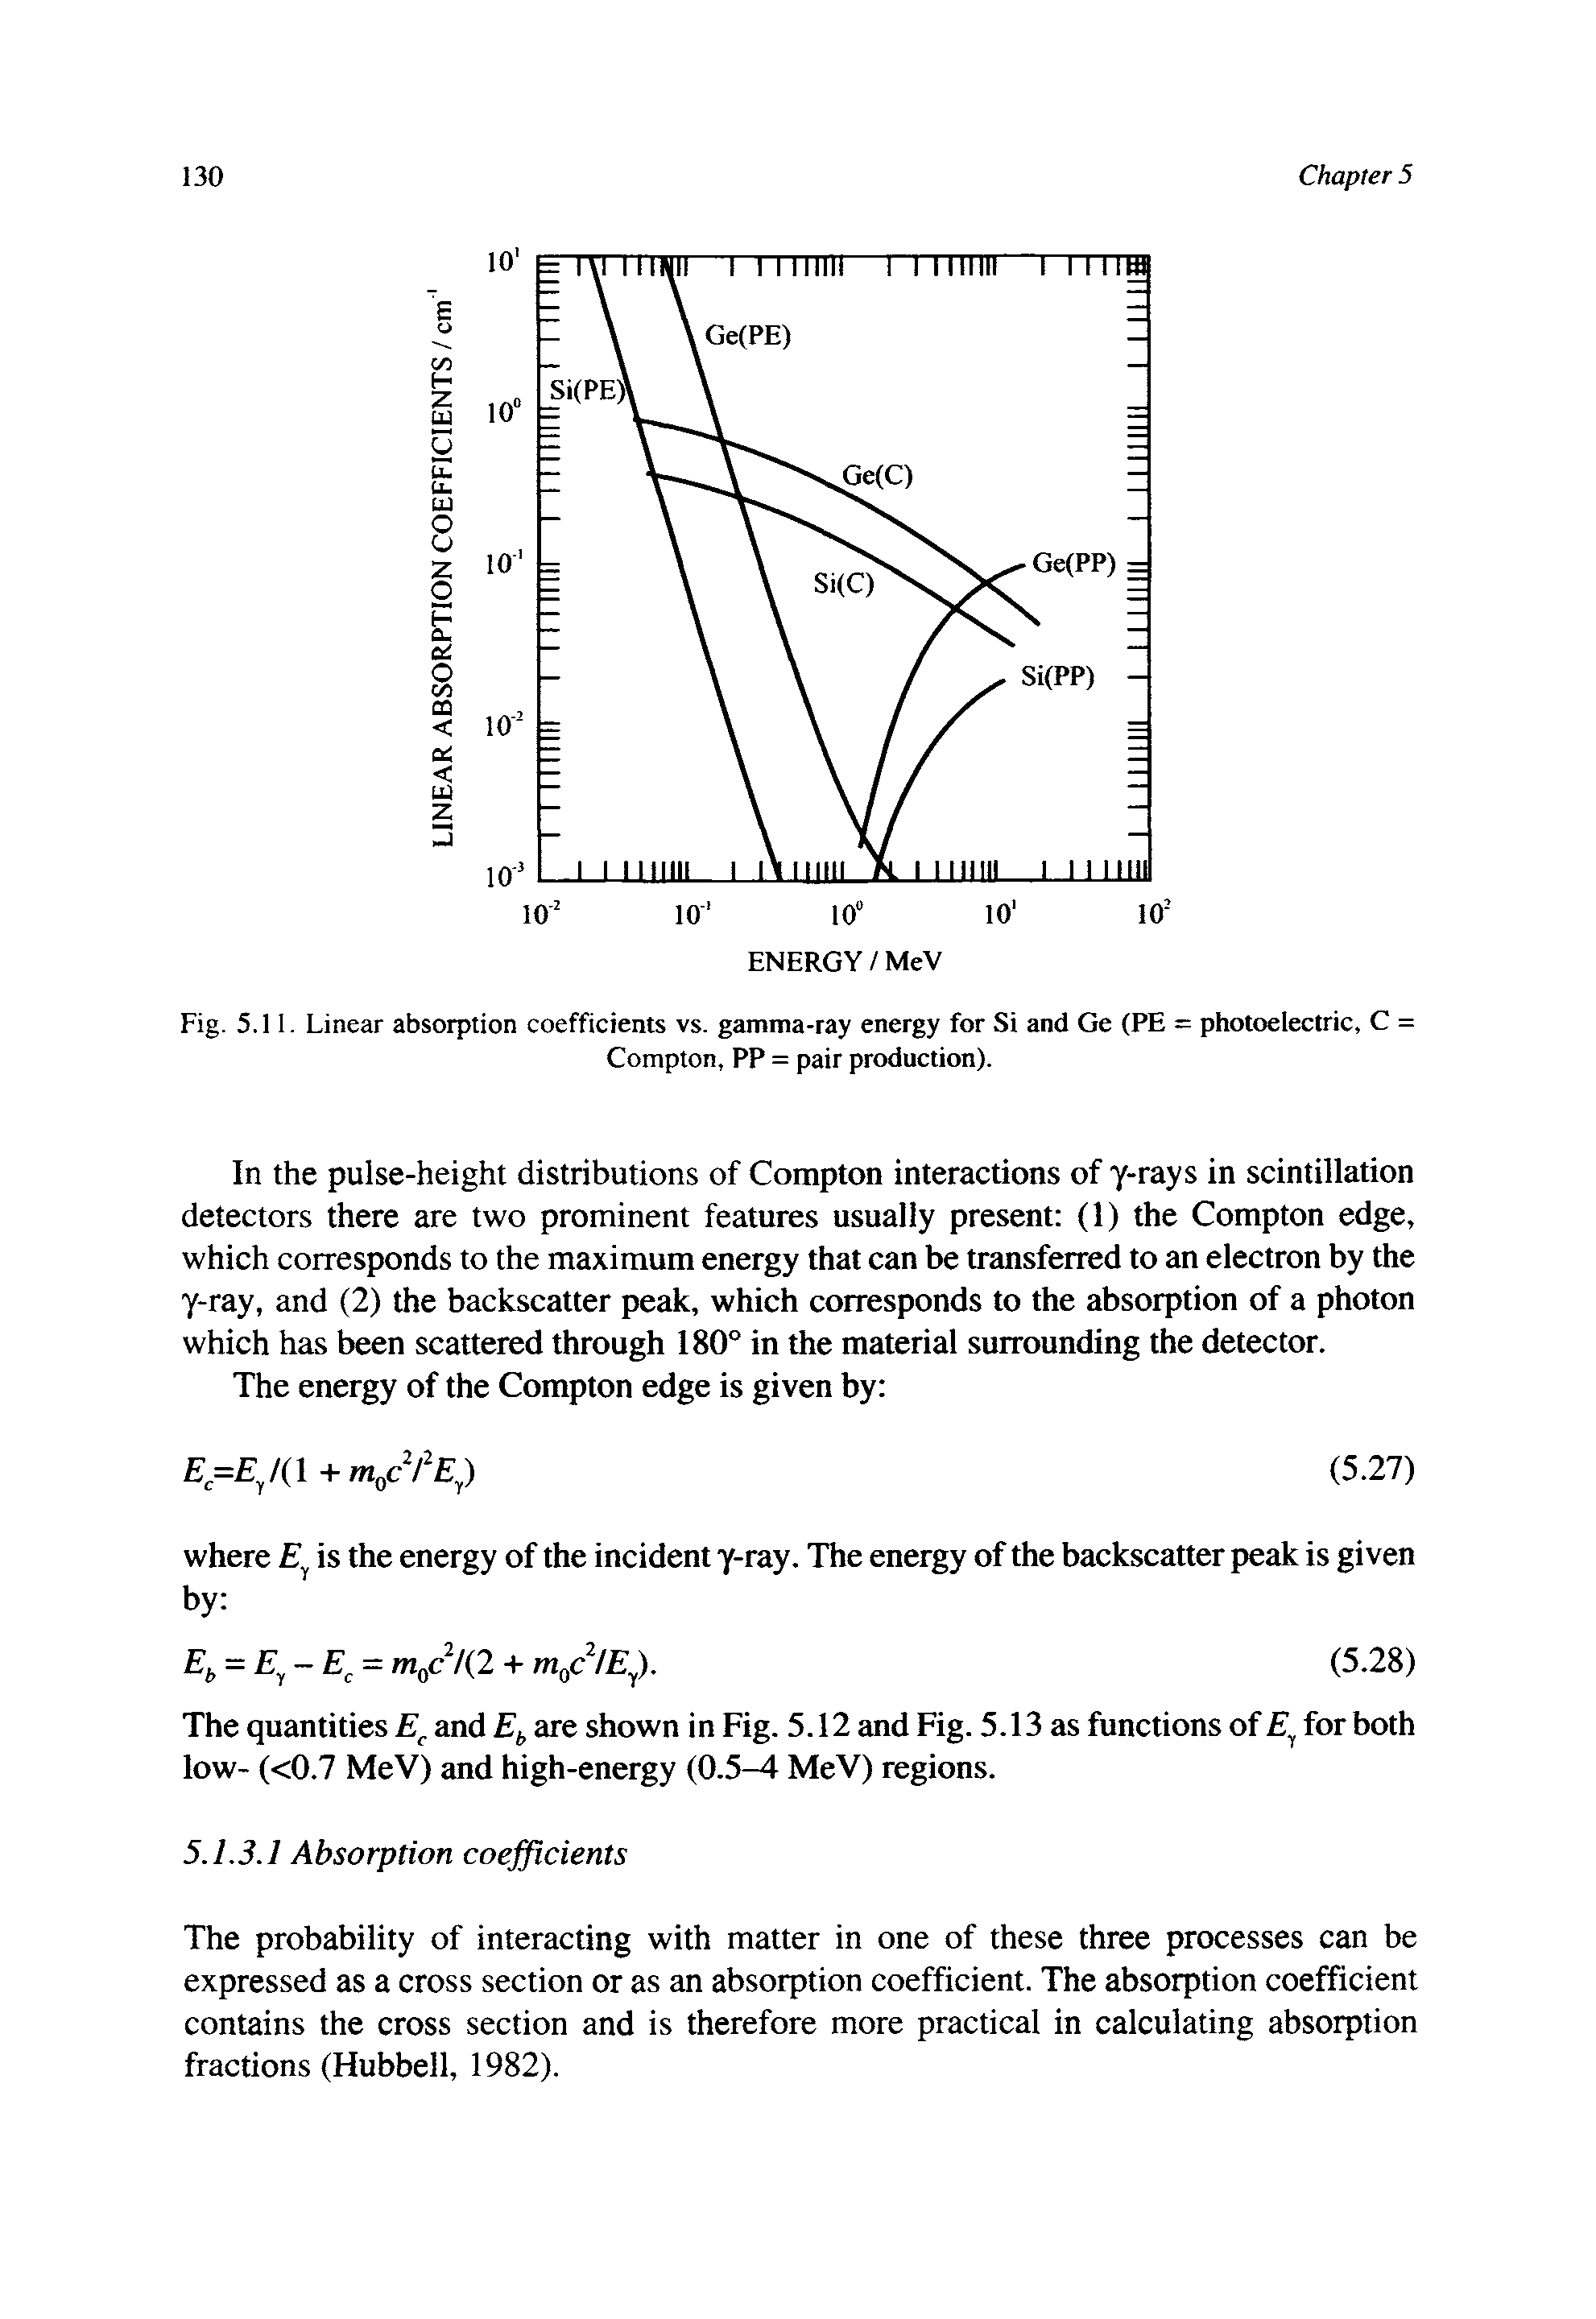 Fig. 5.11. Linear absorption coefficients vs. gamma-ray energy for Si and Ge (PE = photoelectric, C =...